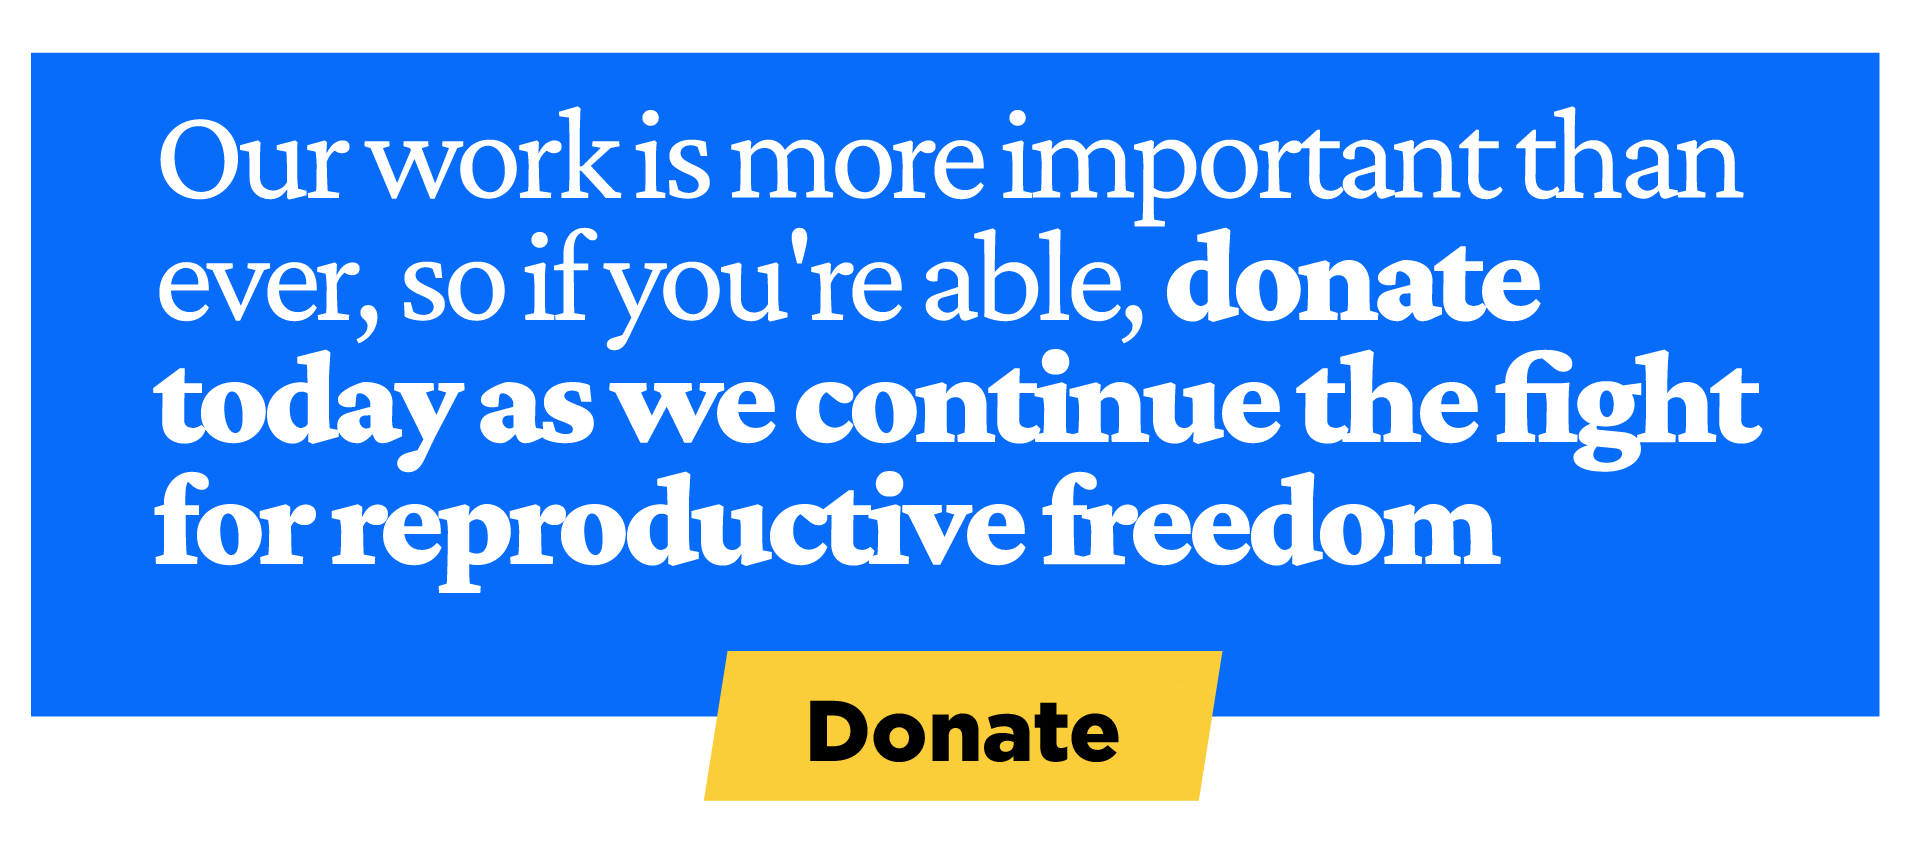 Our work is more important than ever, so if you're able, donate today as we continue the fight for reproductive freedom.